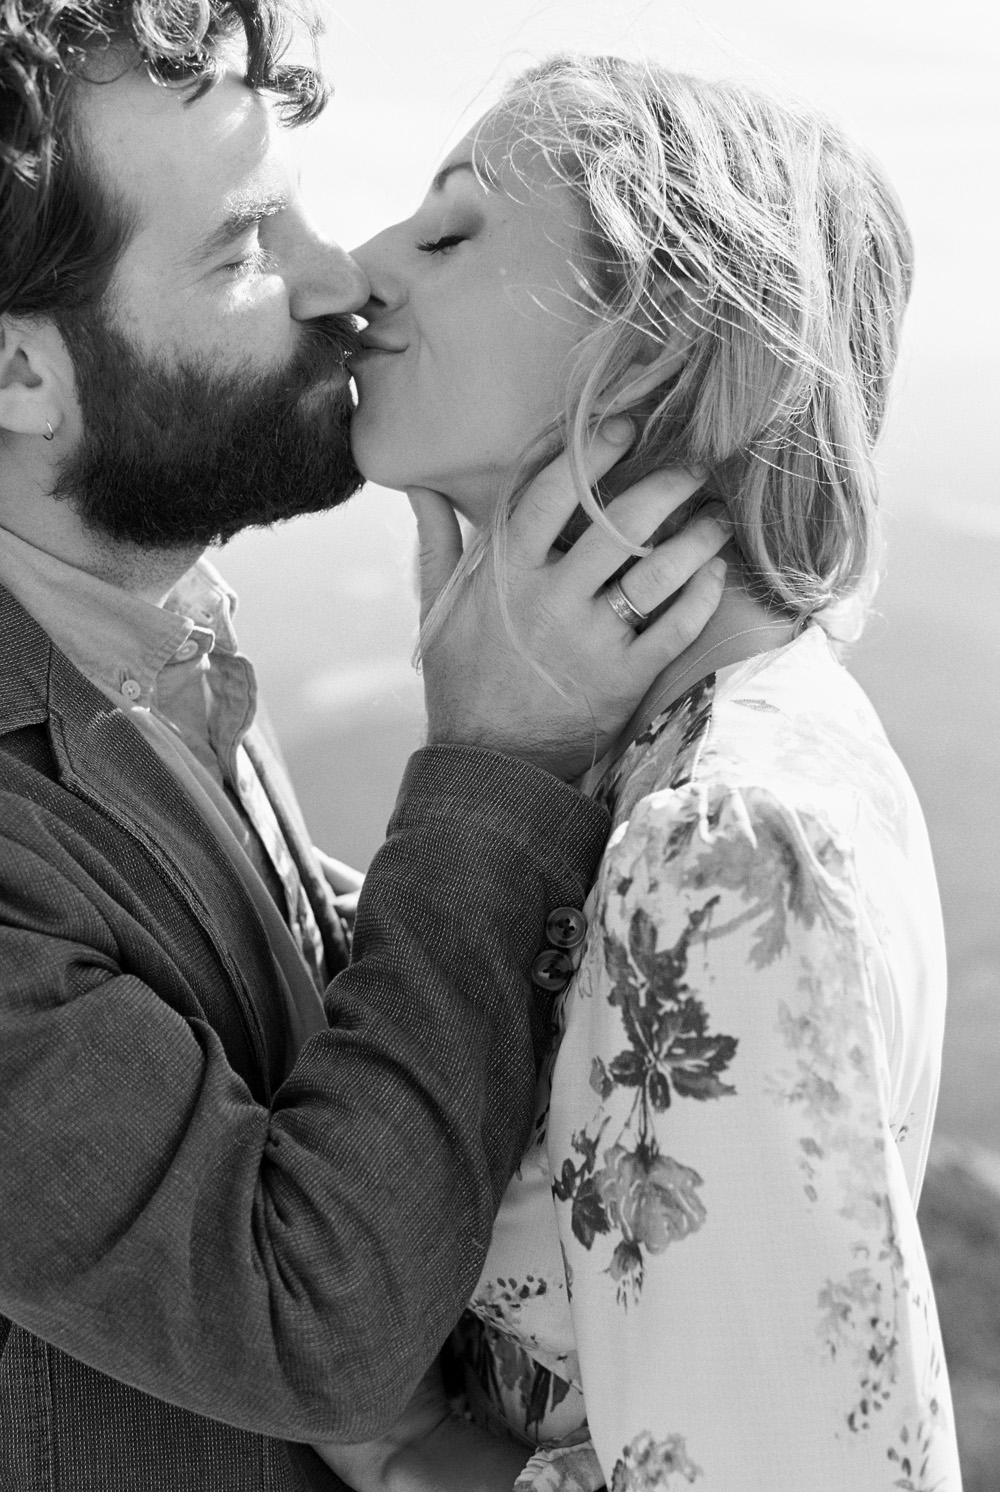 stone fruit studio | whiteface mountain double portrait two people kiss by Mary Dougherty